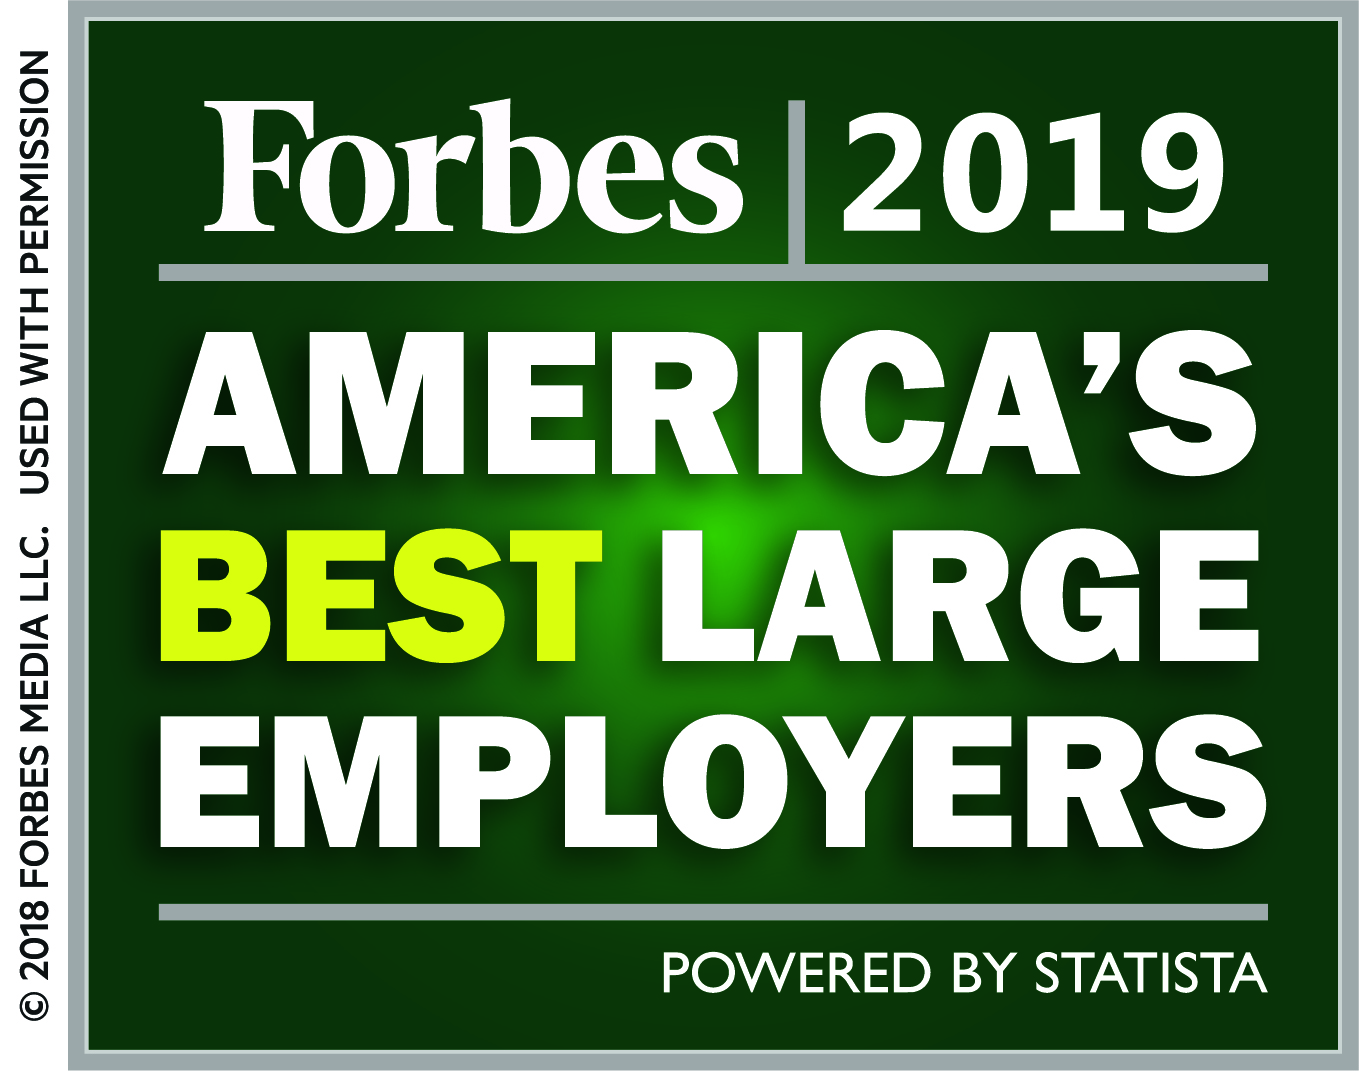 Forbes 2019 Americas Best Large Employers